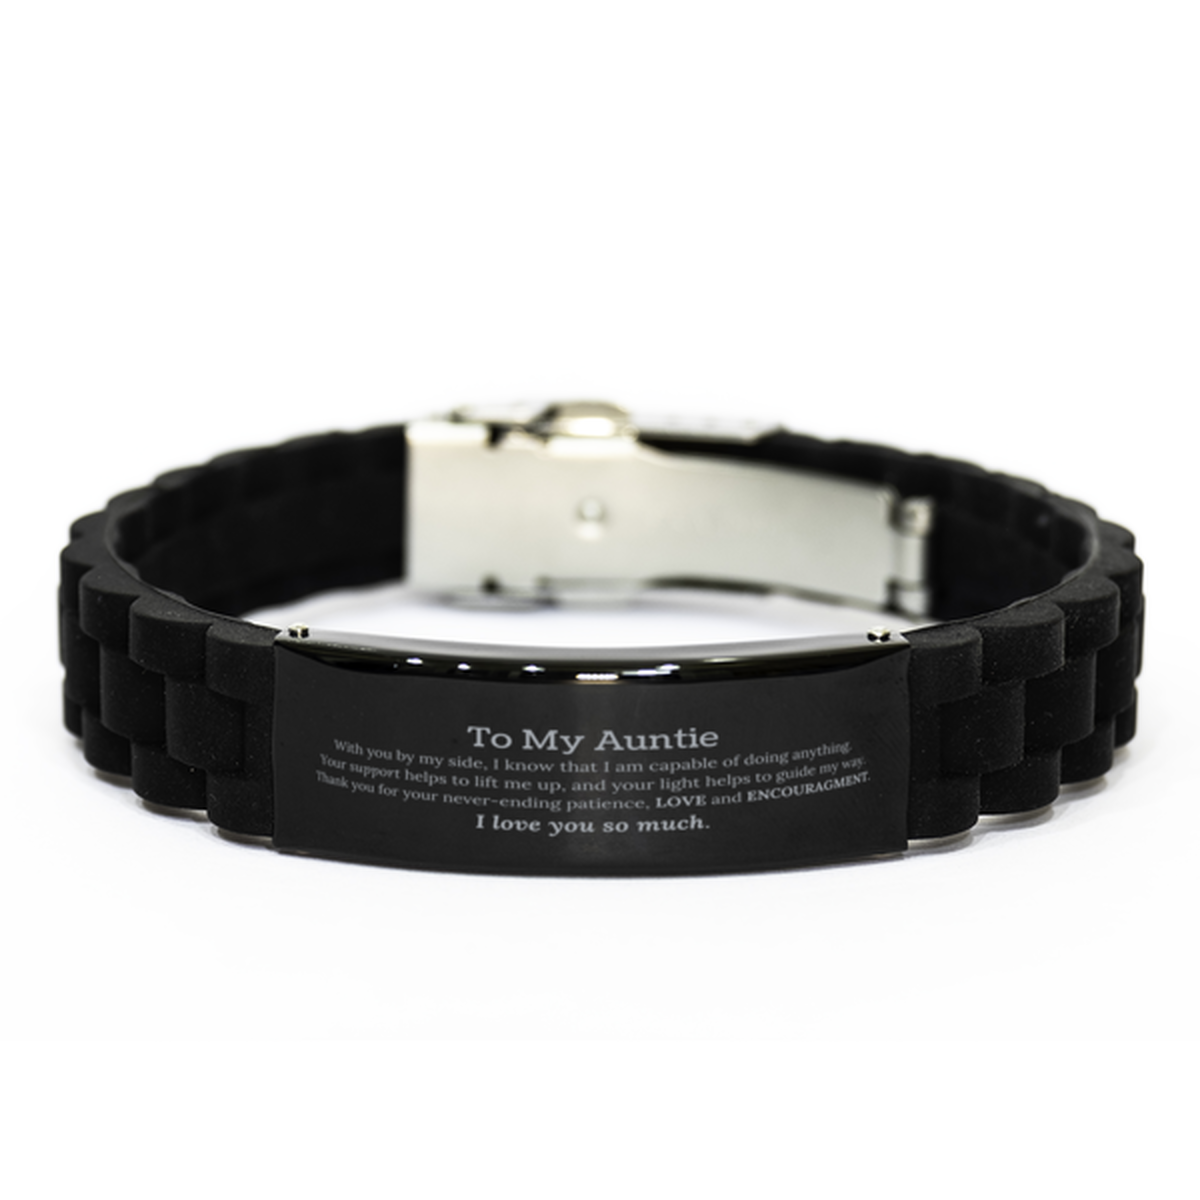 Appreciation Auntie Black Glidelock Clasp Bracelet Gifts, To My Auntie Birthday Christmas Wedding Keepsake Gifts for Auntie With you by my side, I know that I am capable of doing anything. I love you so much